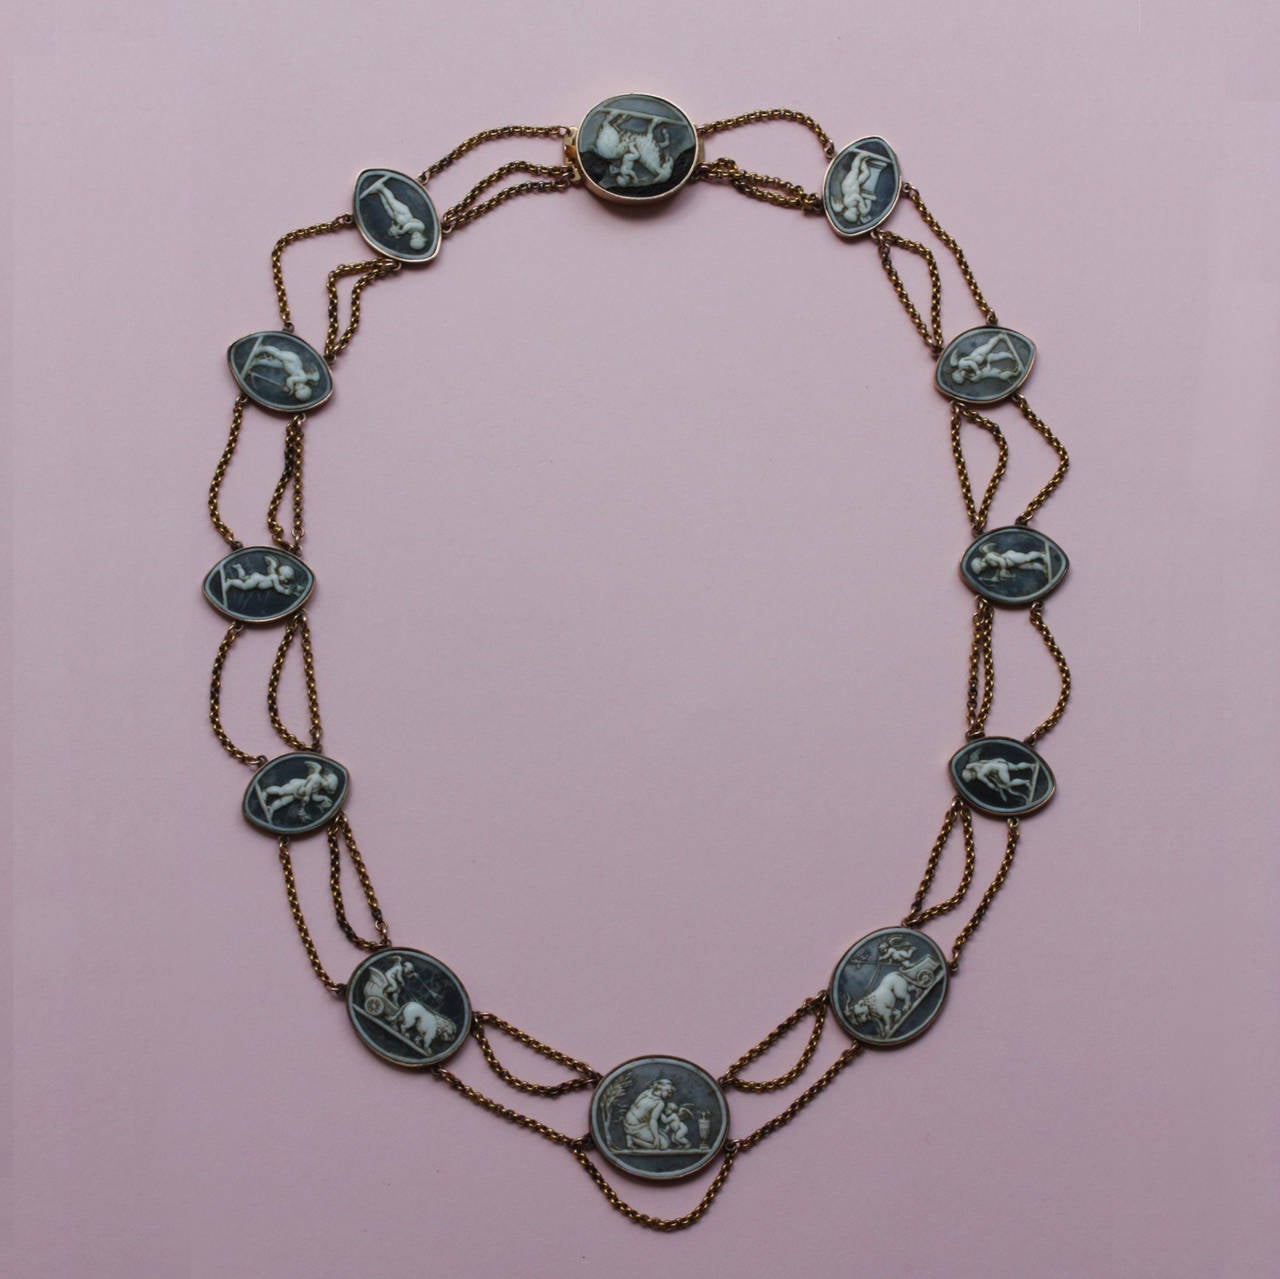 This delightful necklace is an elegant evocation of Classical antiquity. It may well have begun life as an intimate and treasured reminder of the Grand Tour. The cameos would have been bought in Italy; then set into a necklace back home in England.